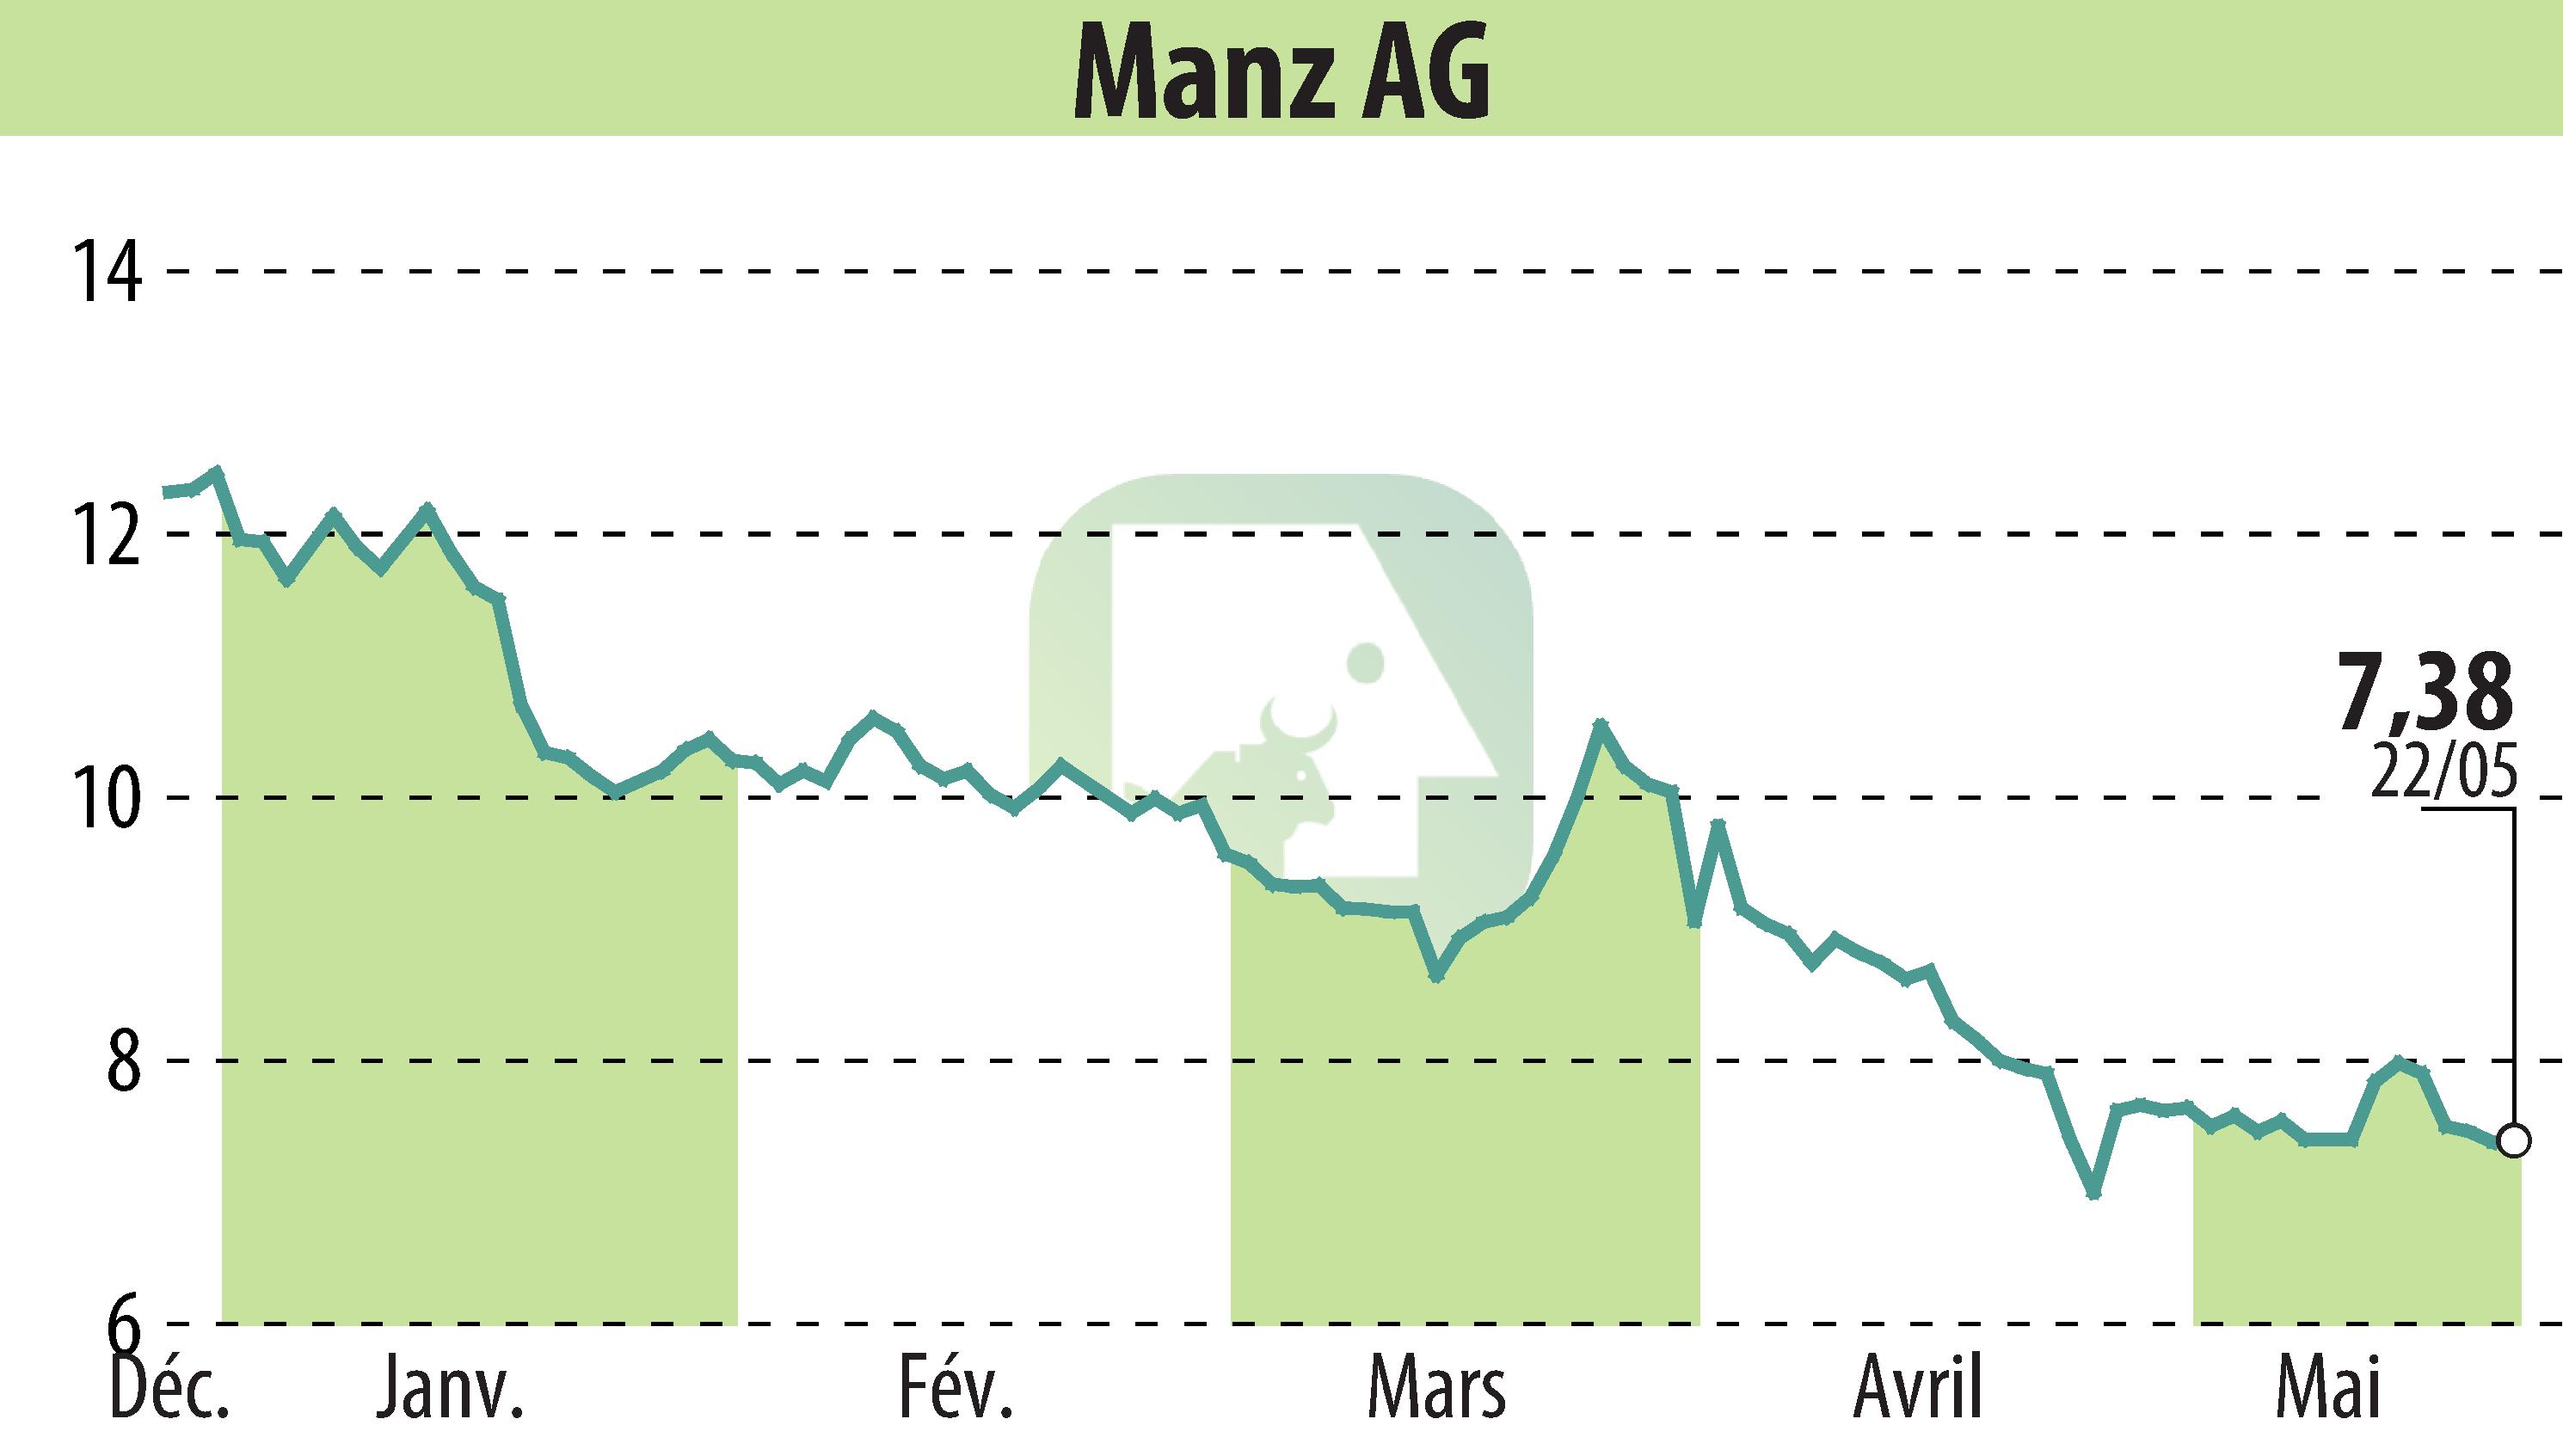 Stock price chart of Manz AG (EBR:M5Z) showing fluctuations.